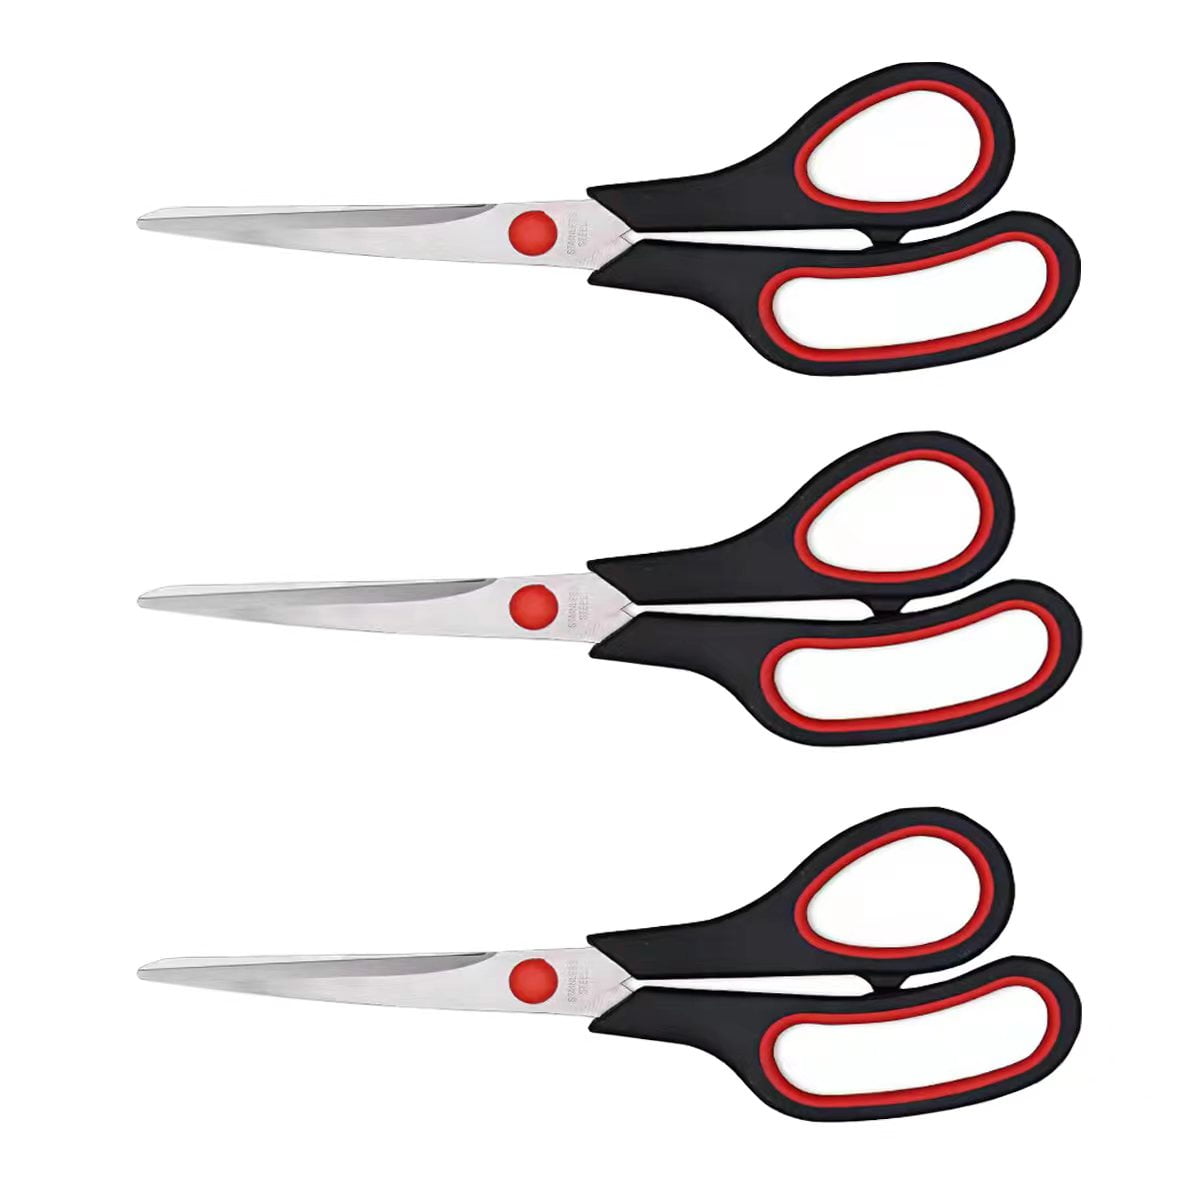 Scissors All Purpose Heavy Duty, Scissors for Office, Scissors for Office  Desk Accessories Sewing Fabric Home Craft School Supplies, Right/Left  Handed